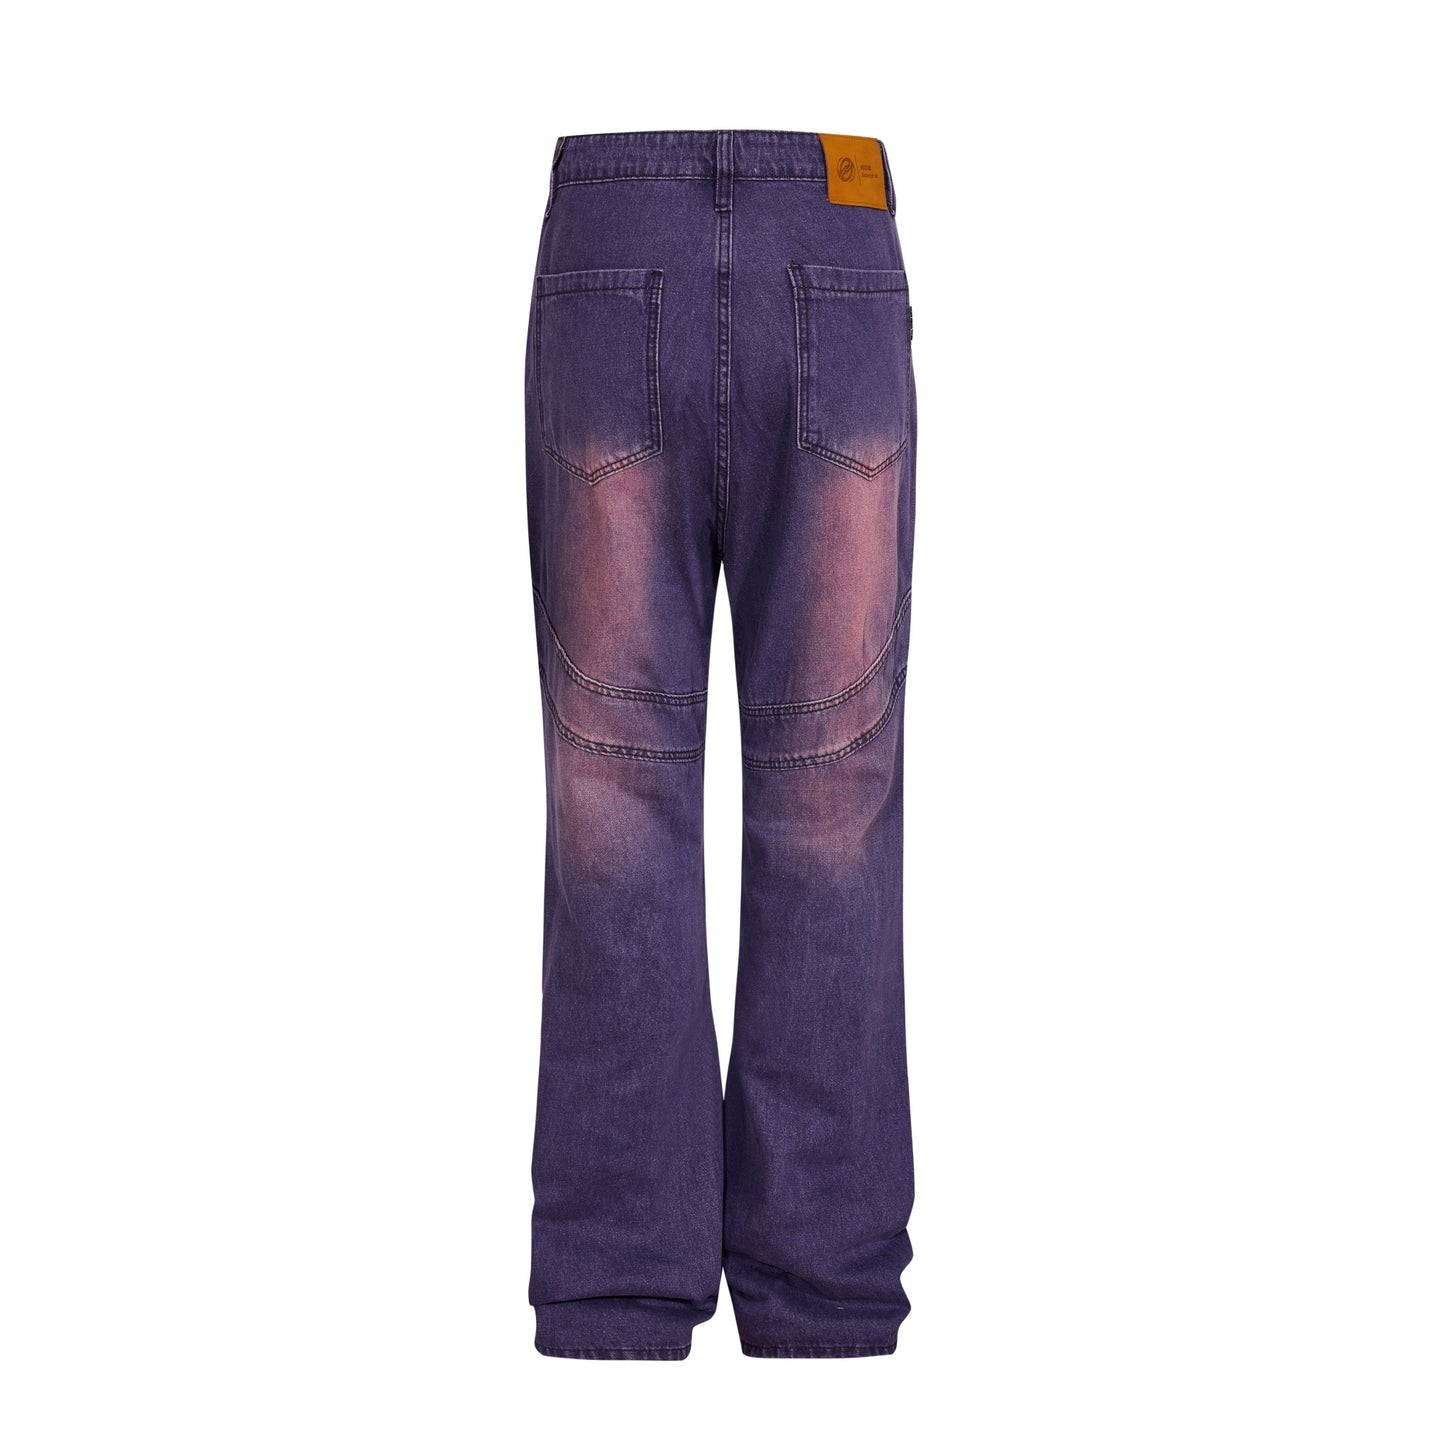 R69 PLAYING WITH LOVE DENIM PANTS